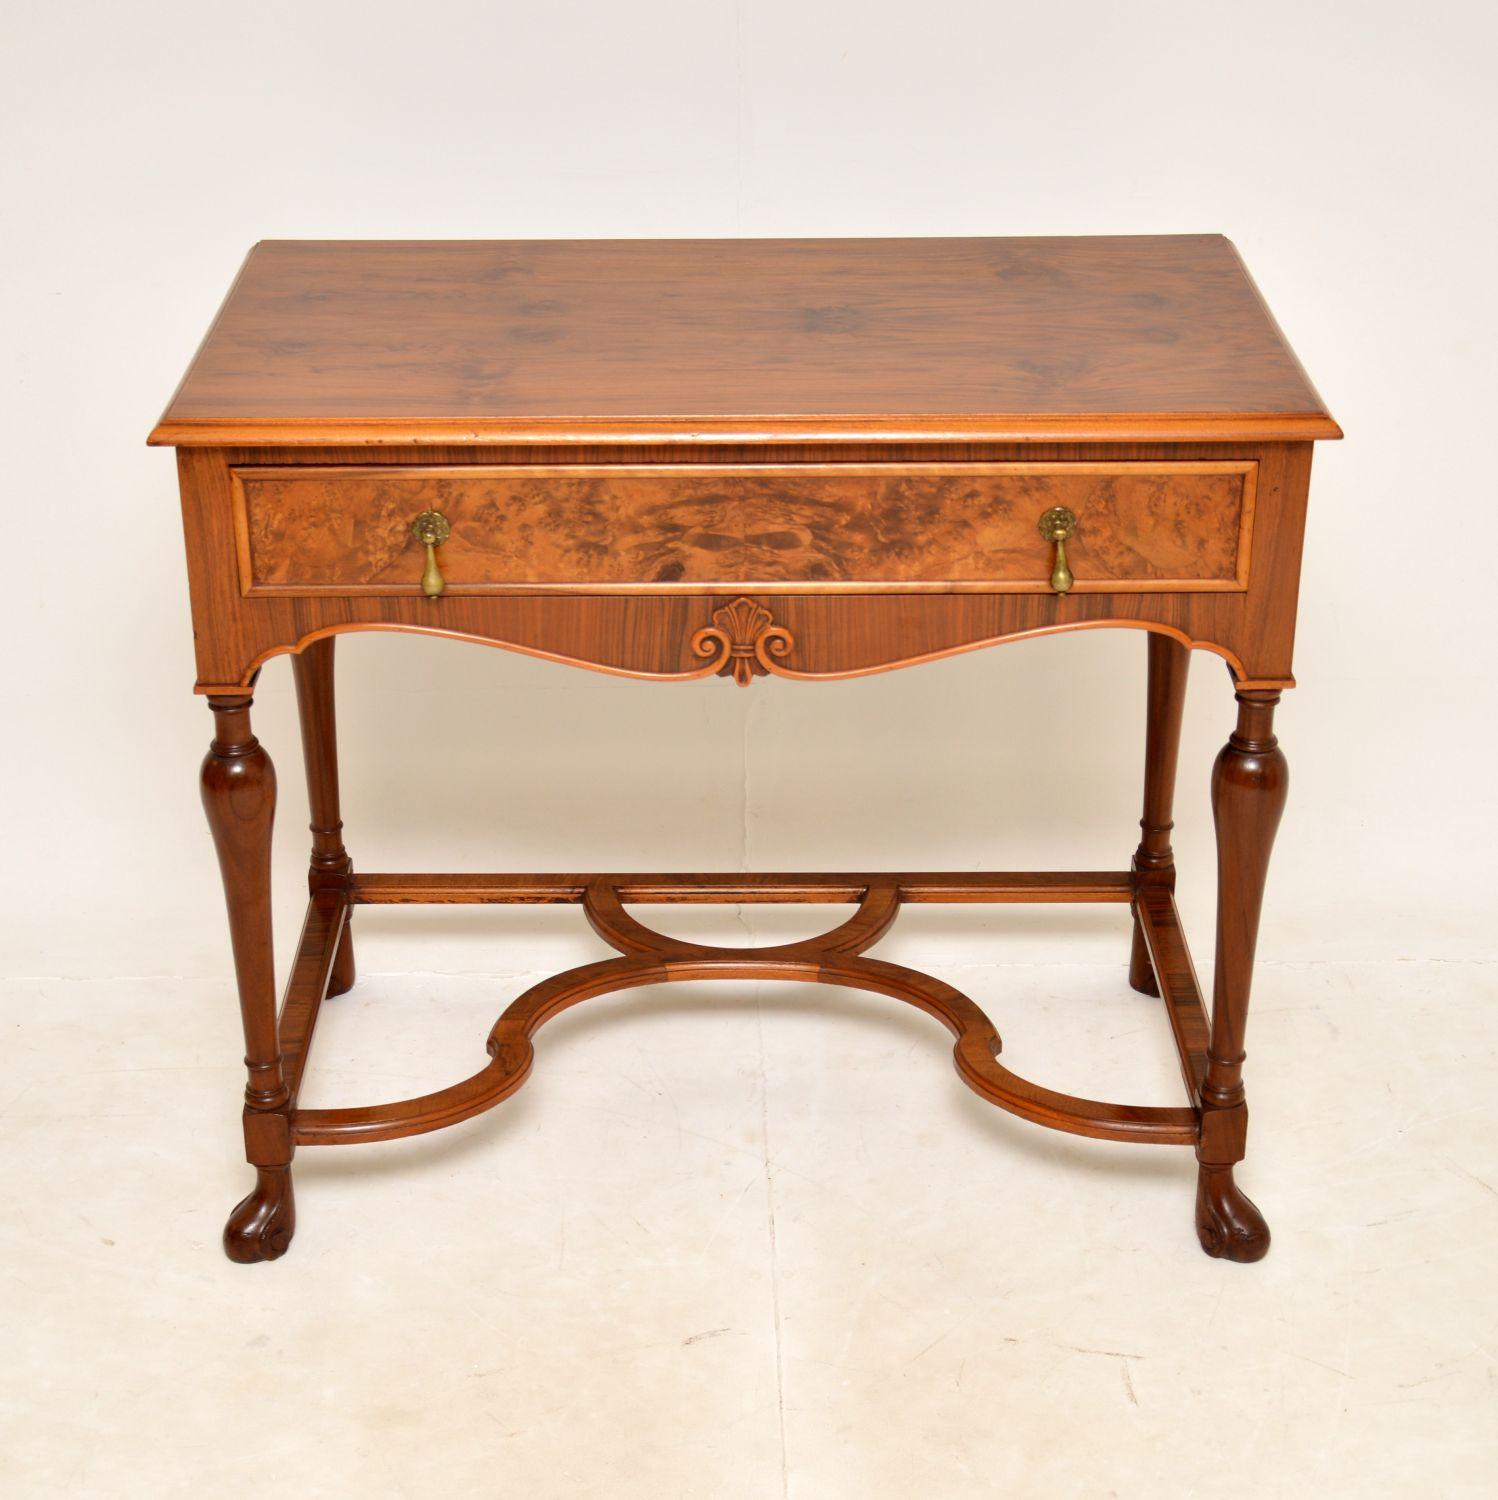 A beautiful and impressive antique console / side table in walnut. This was made in England, it dates from around the 1930’s period.

It is of superb quality, with a stunning burr walnut drawer front and lovely figured walnut top and sides. The legs